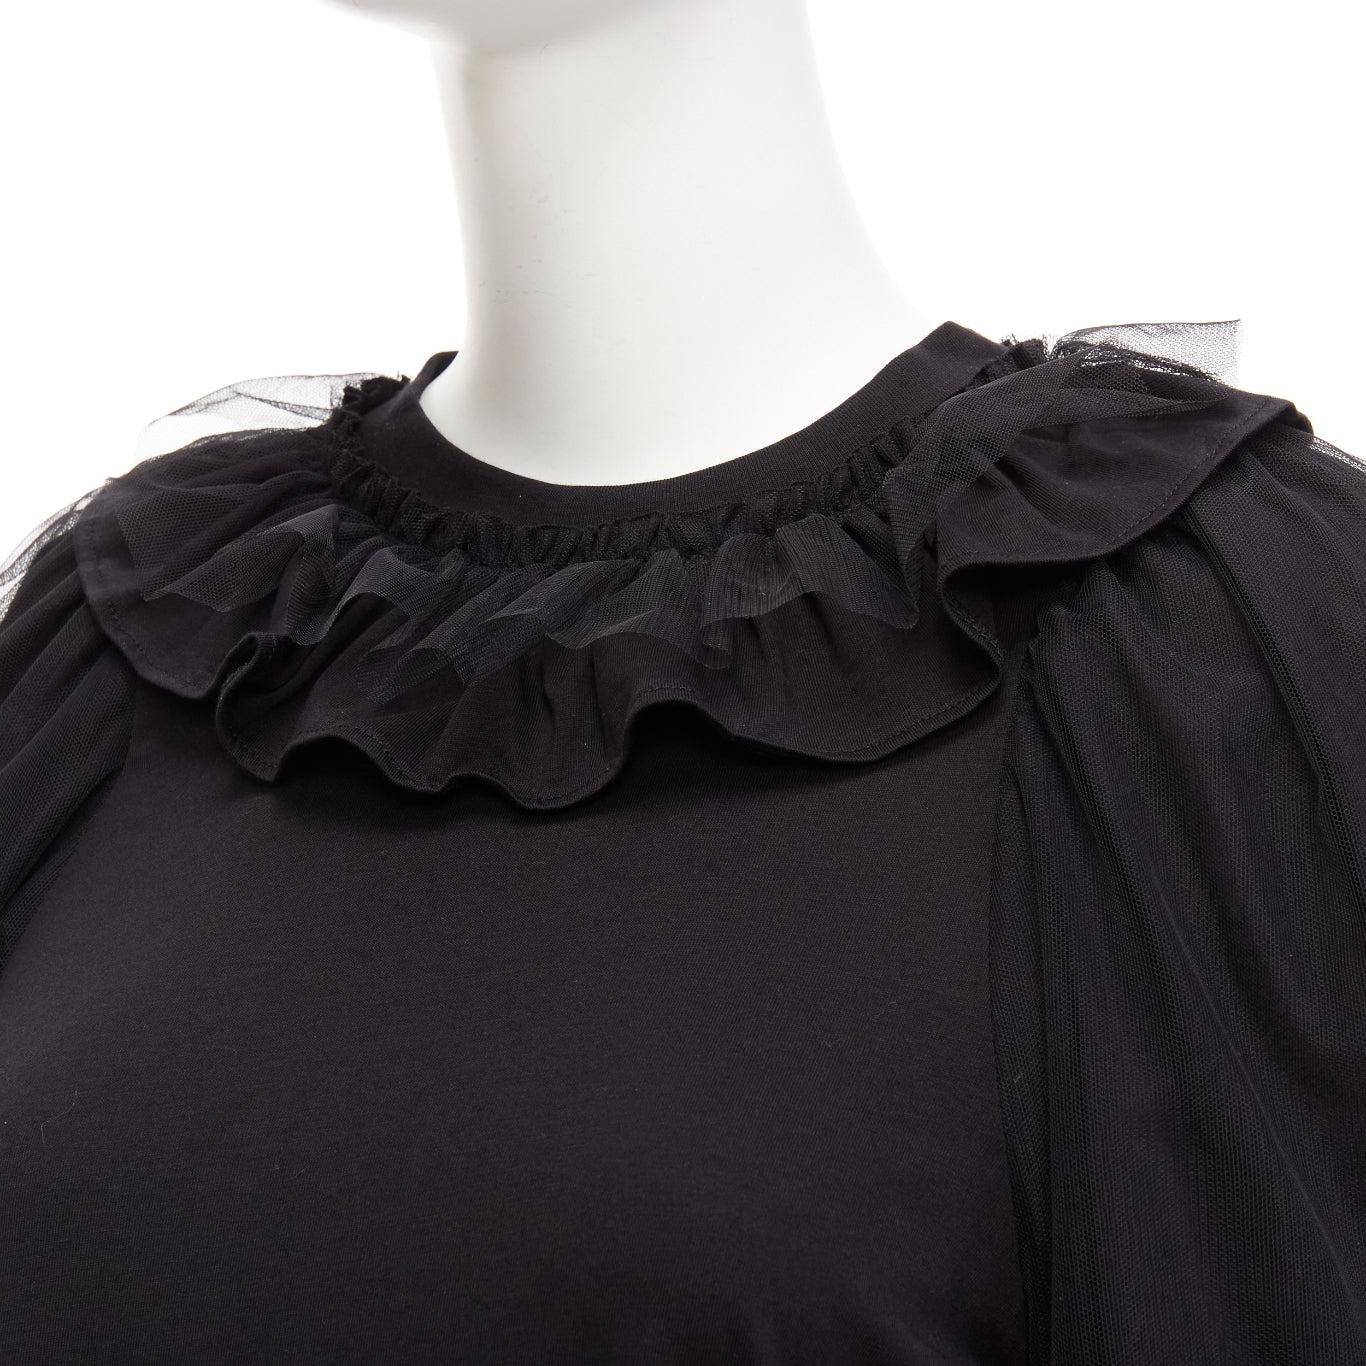 SIMONE ROCHA black cotton sheer overlay puff sleeves ruffle tshirt XS
Reference: AAWC/A00747
Brand: Simone Rocha
Material: Cotton, Polyester
Color: Black
Pattern: Solid
Closure: Slip On
Lining: Black Cotton
Made in: Portugal

CONDITION:
Condition: